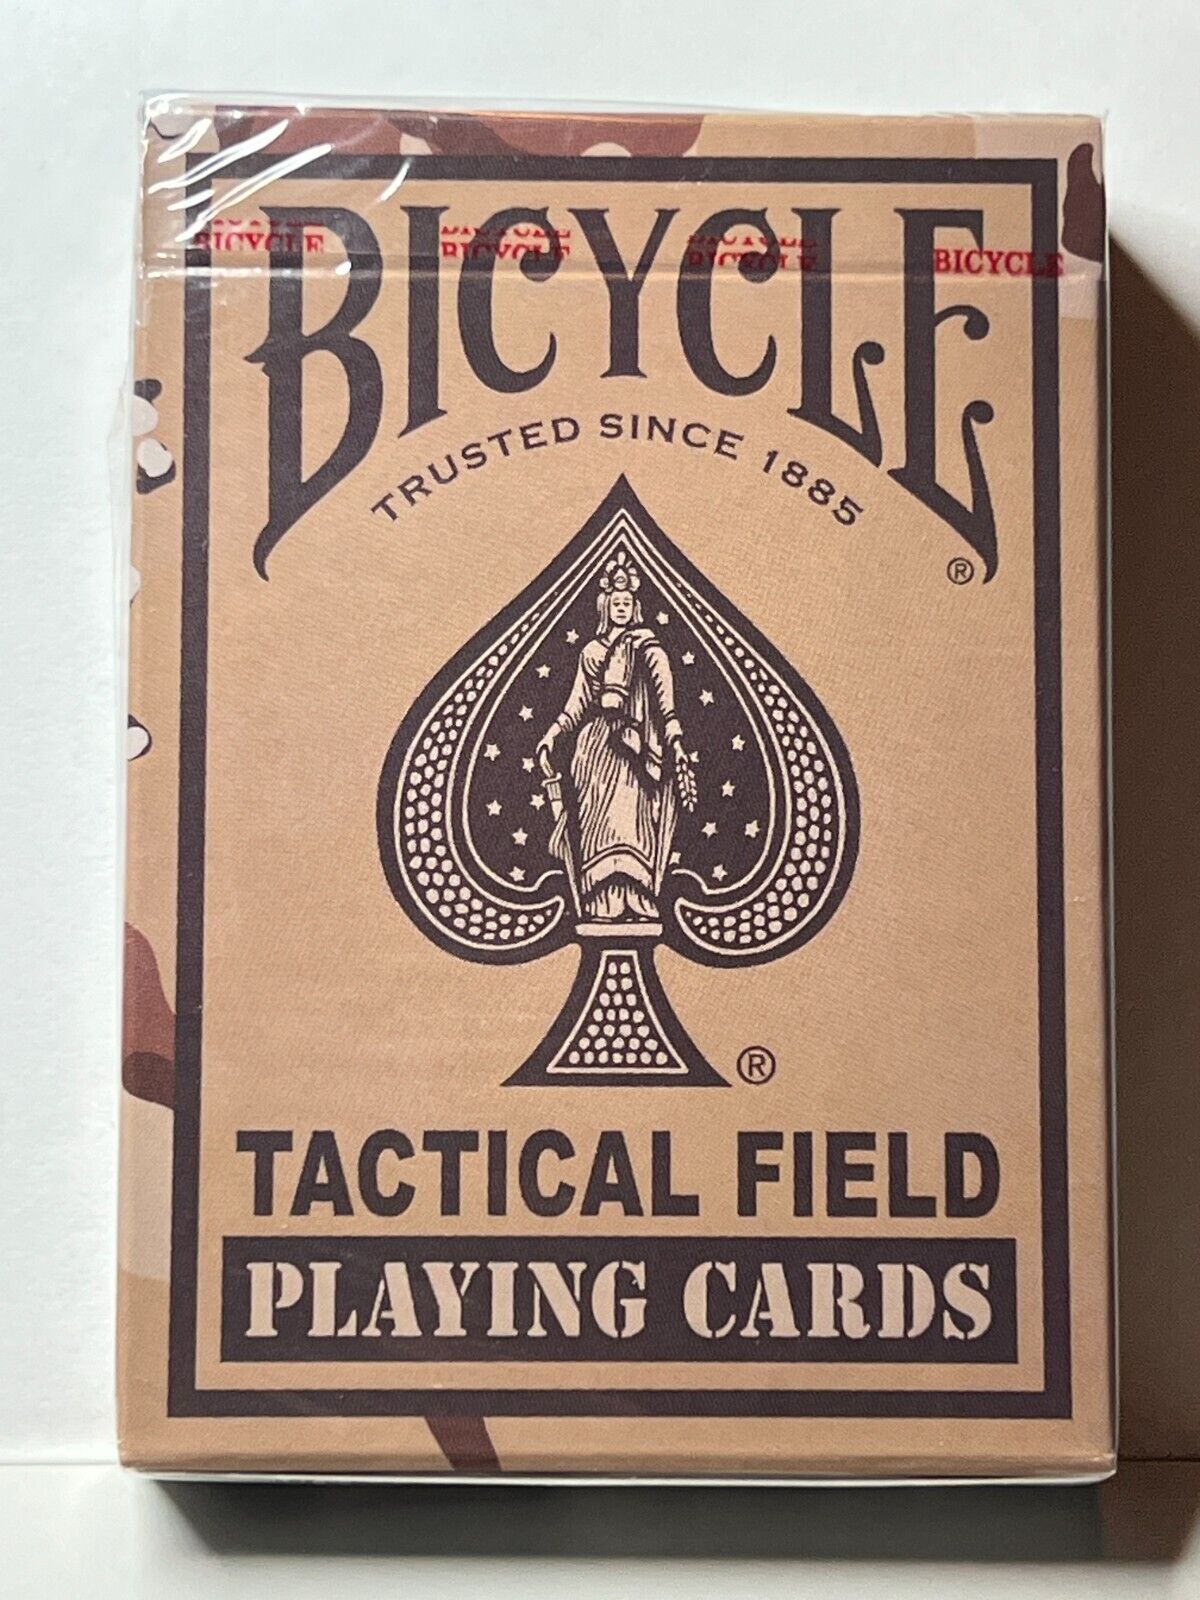 Tactical Field (Desert Brown Camo) [Bicycle] - Playing Cards -